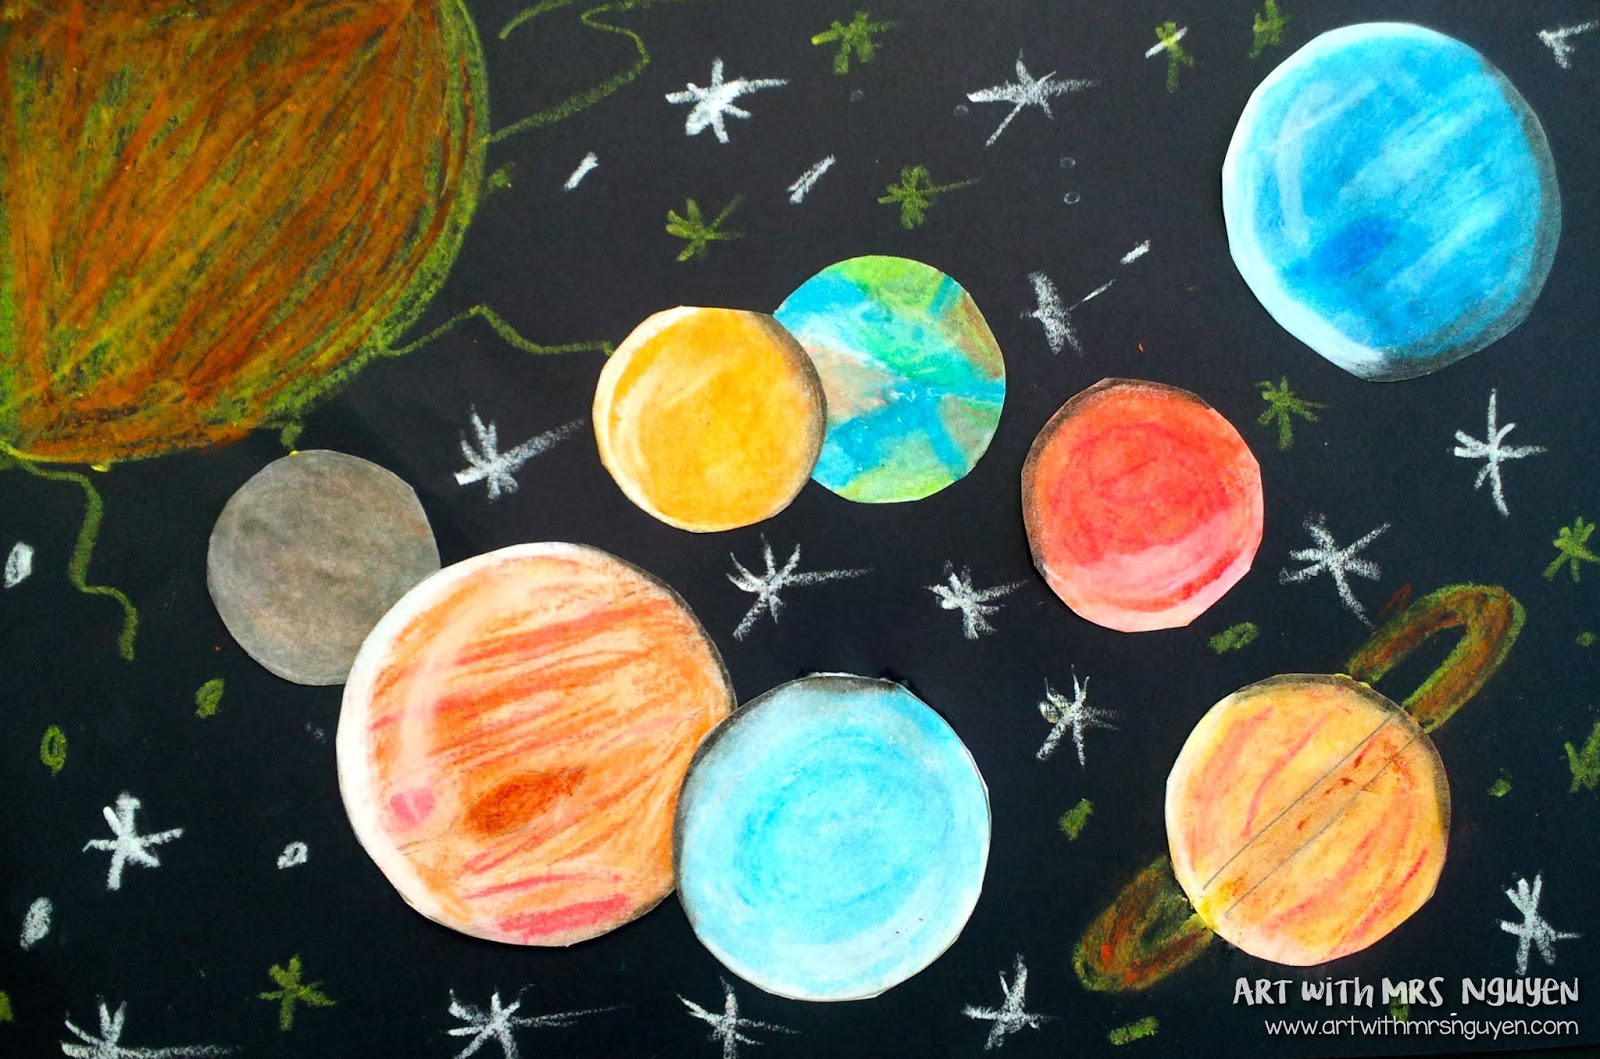 solar system paintings